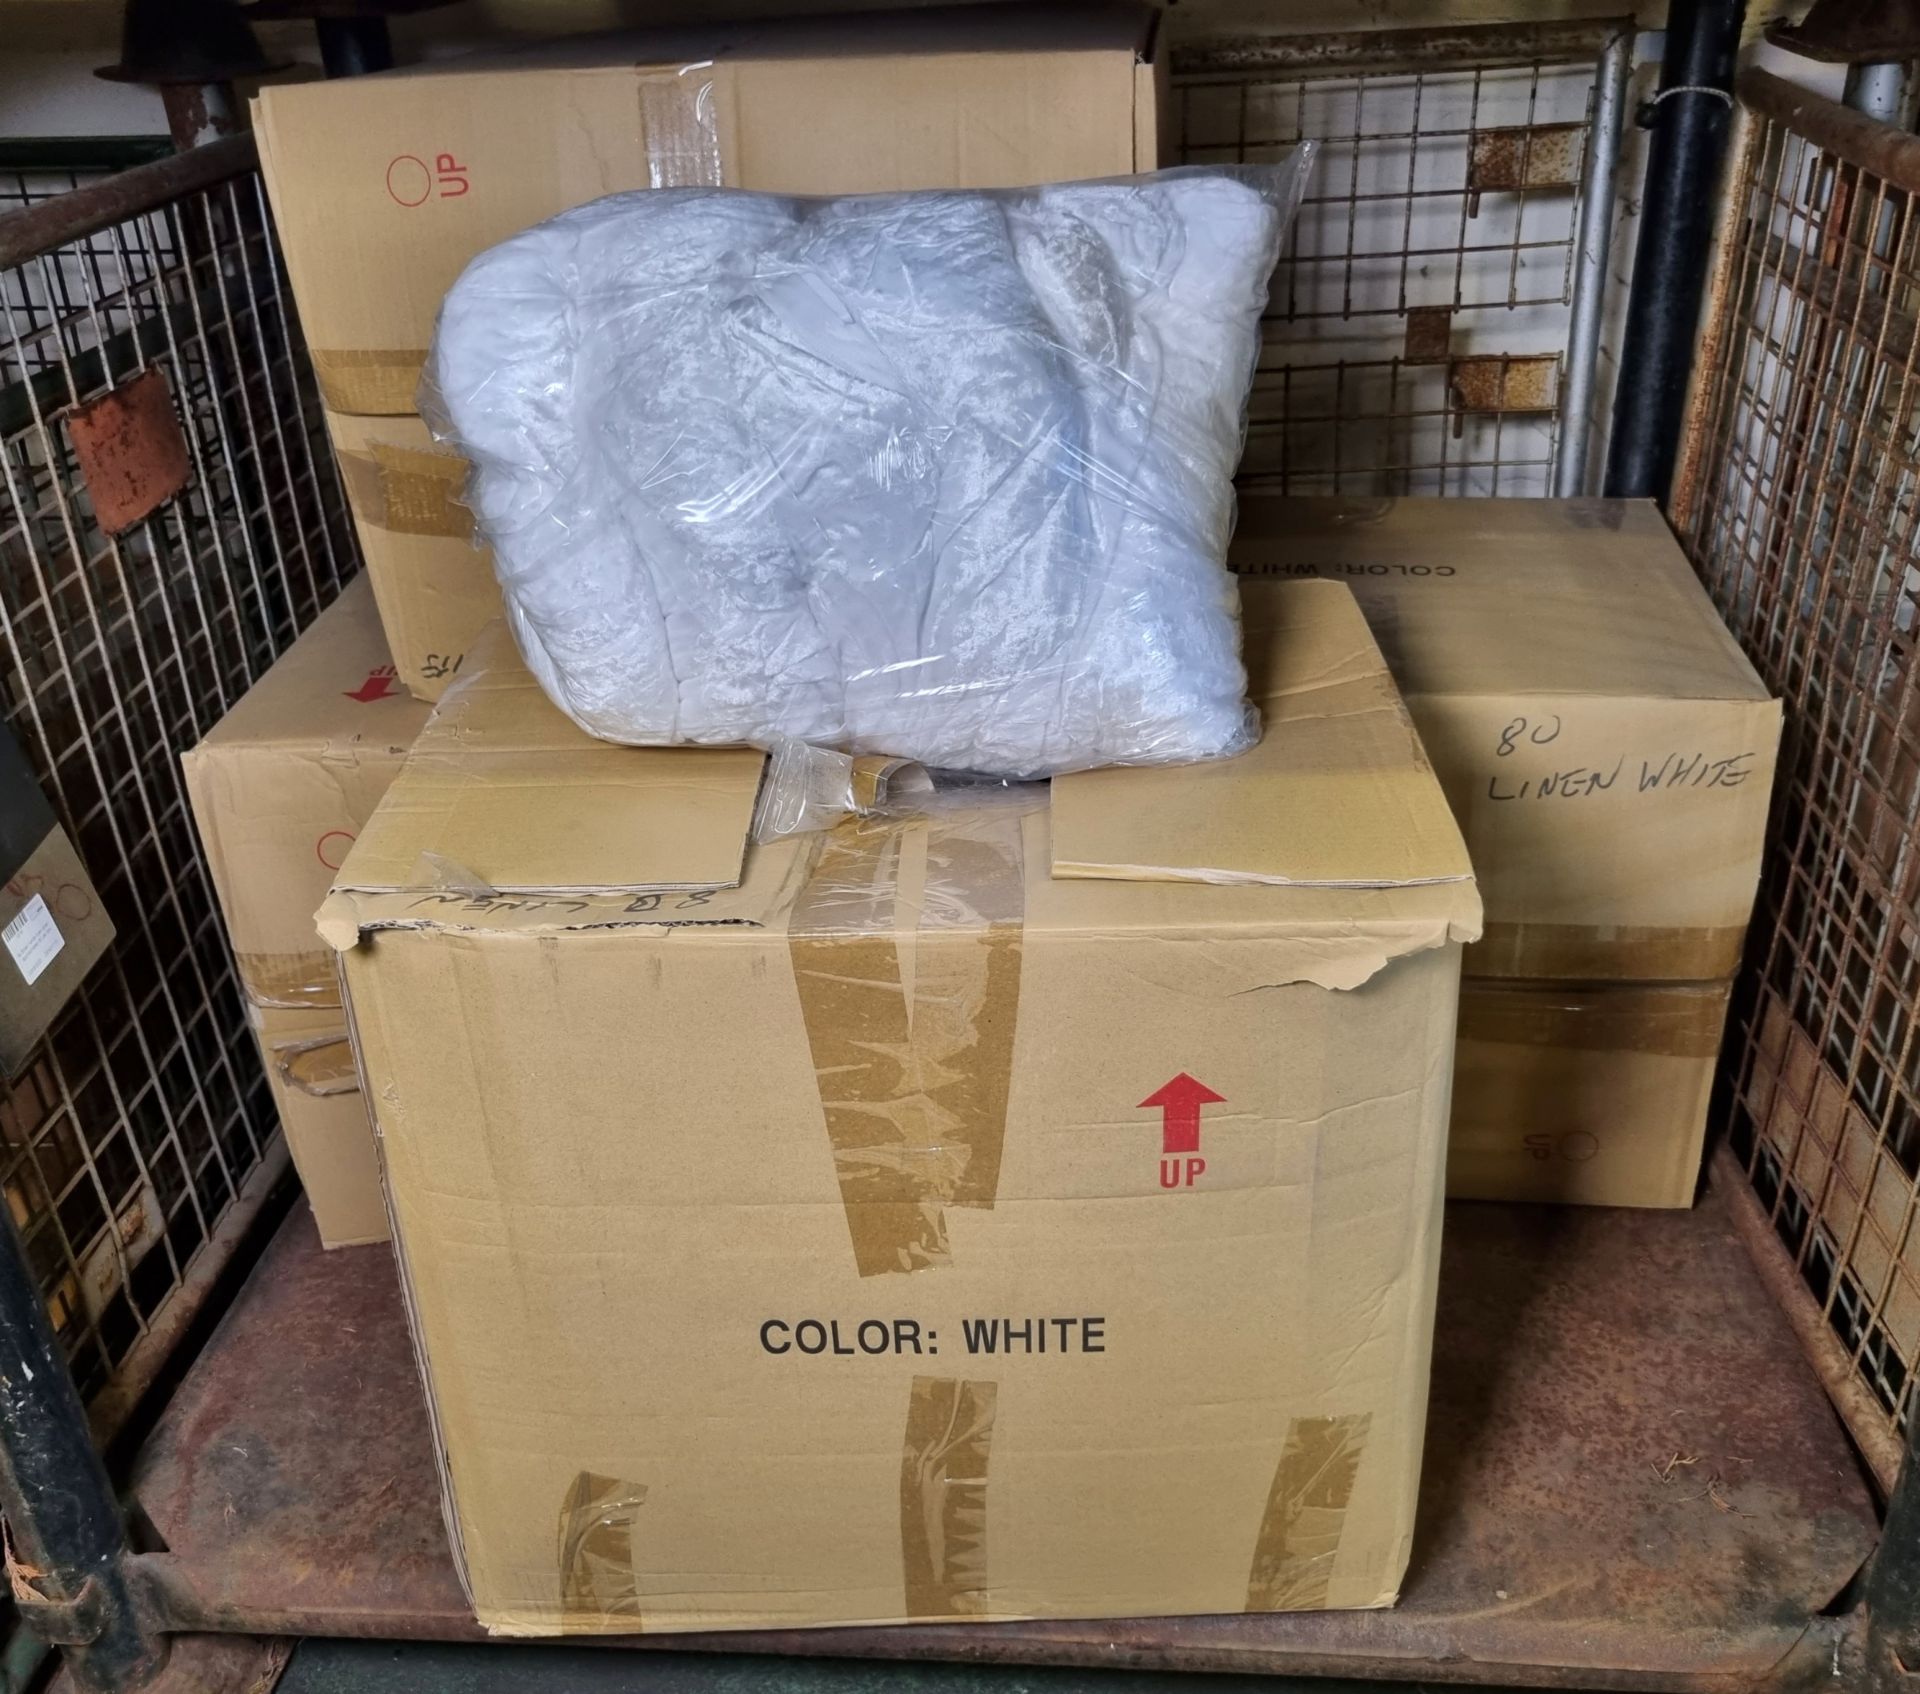 4x boxes of Silver / white linen cover - approximately 80 per box